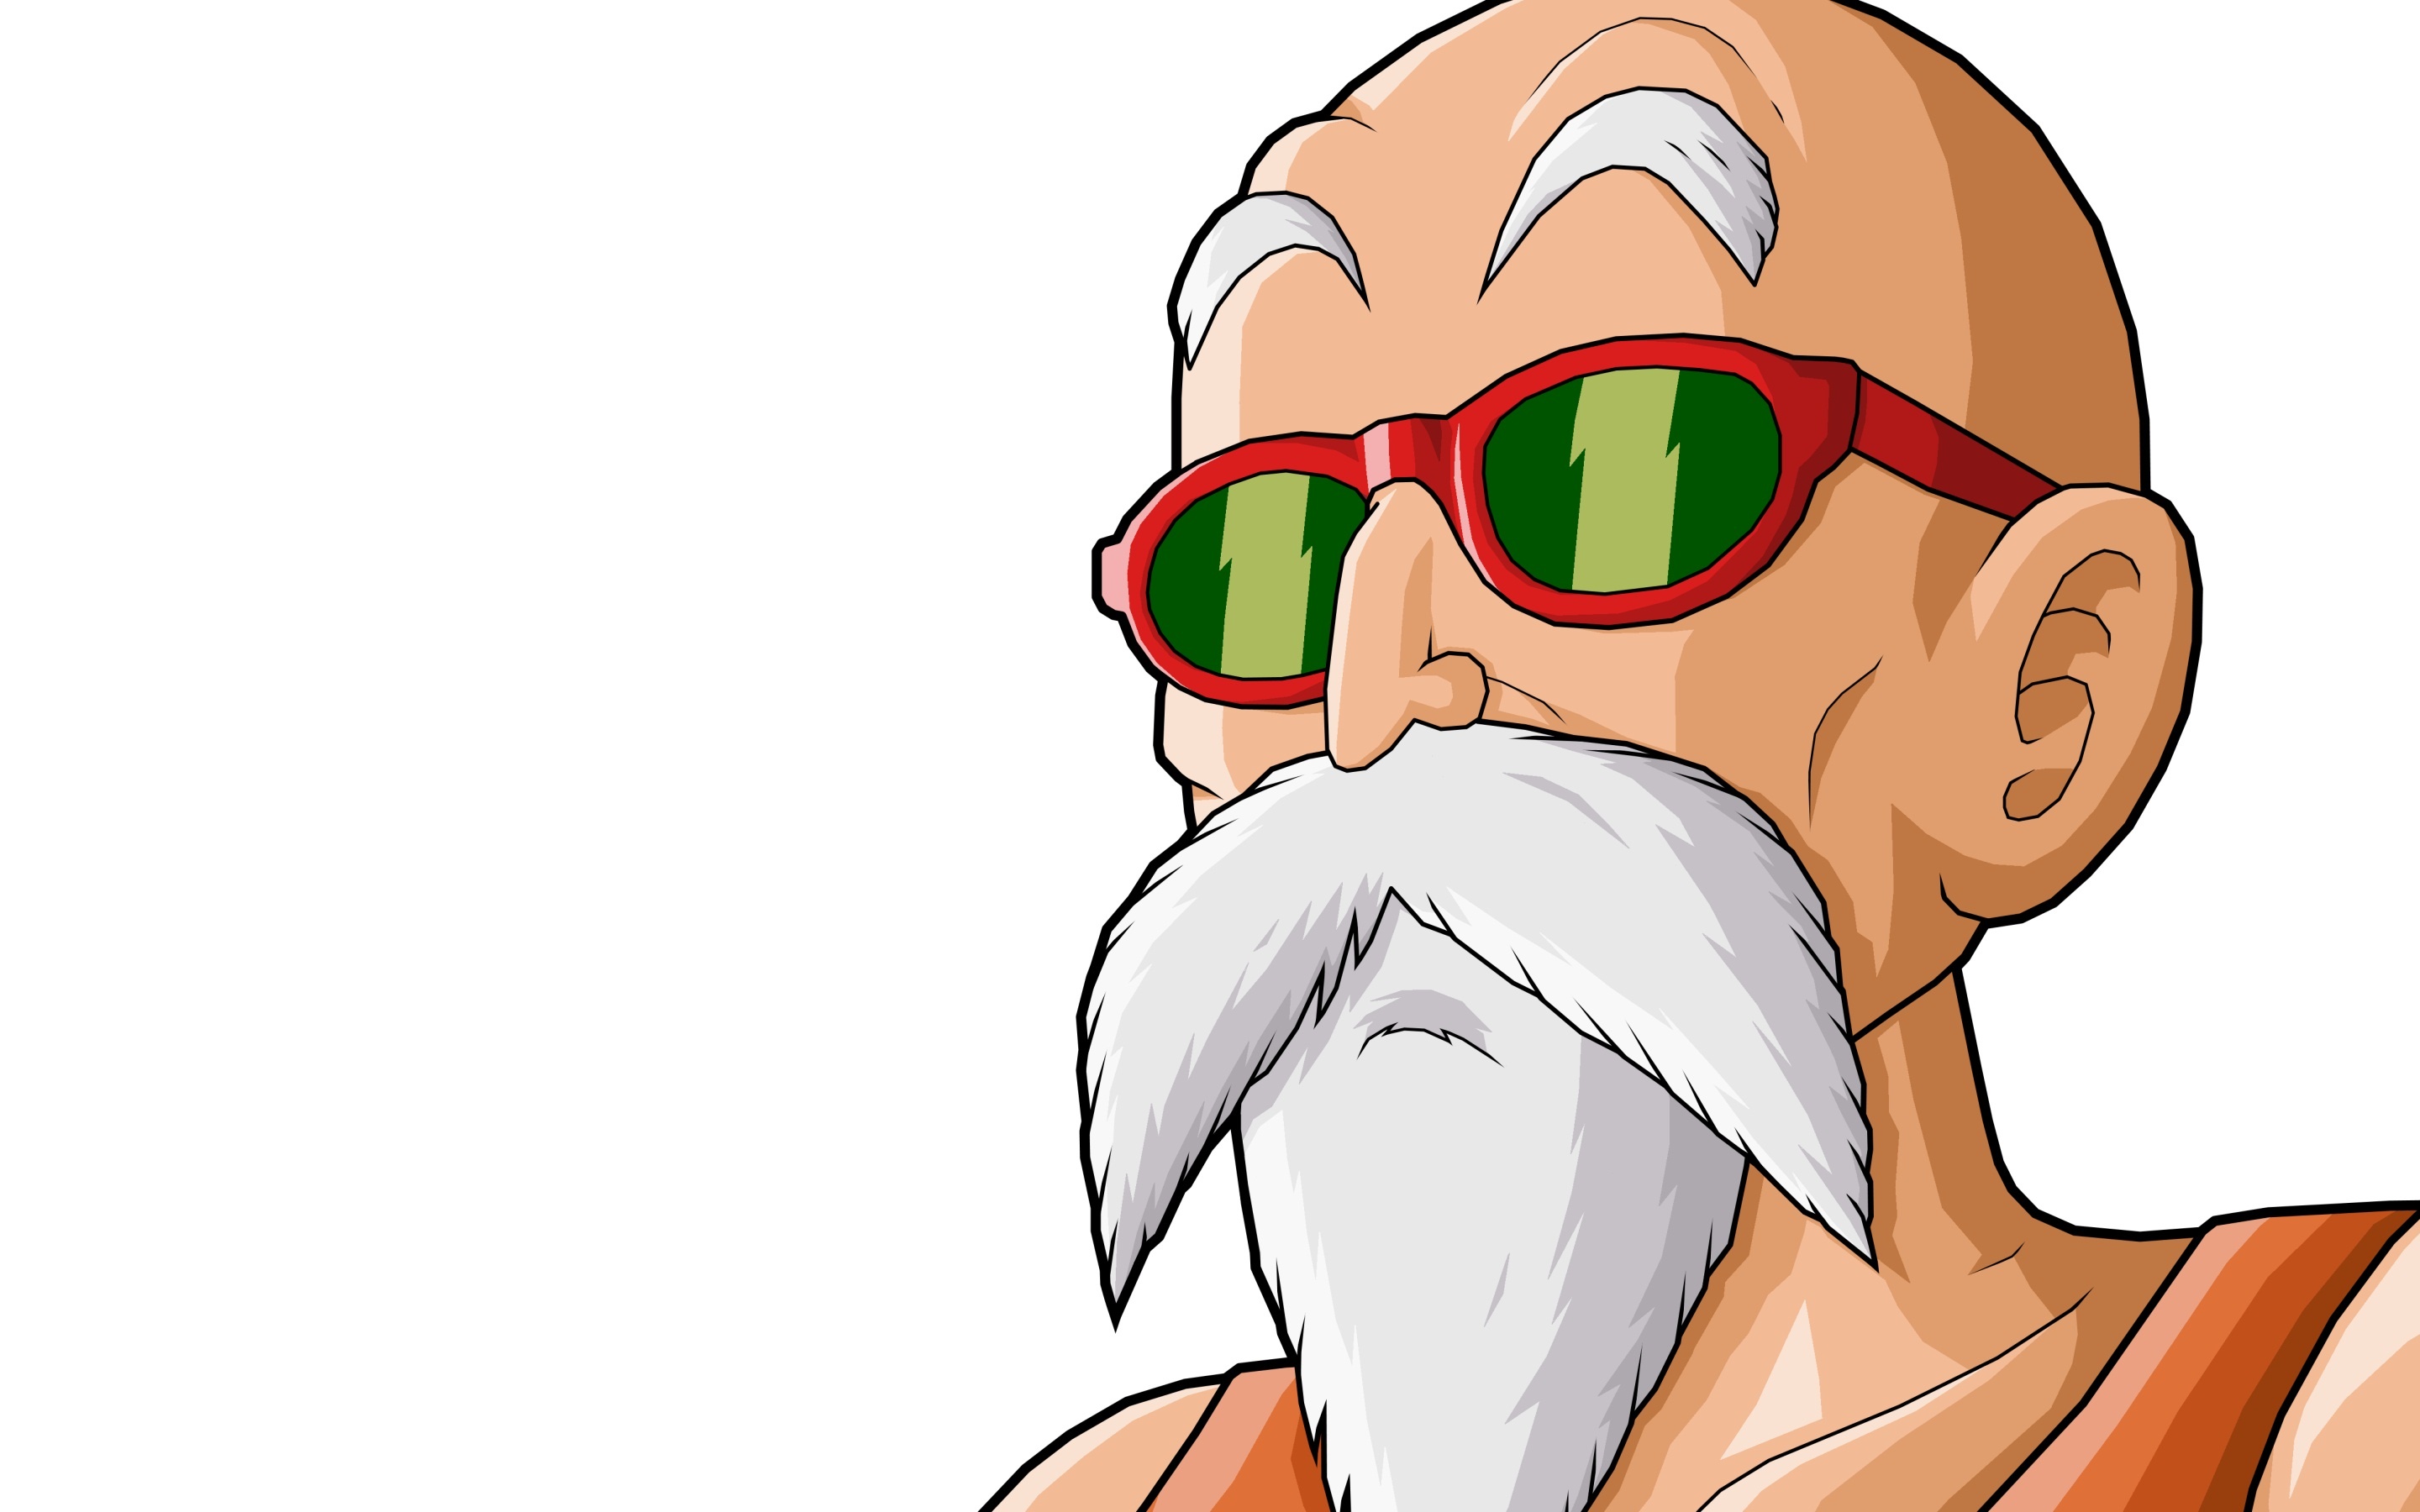 Master Roshi, Dragon Ball wallpapers, Martial arts prowess, Z-Fighter legacy, 2880x1800 HD Desktop